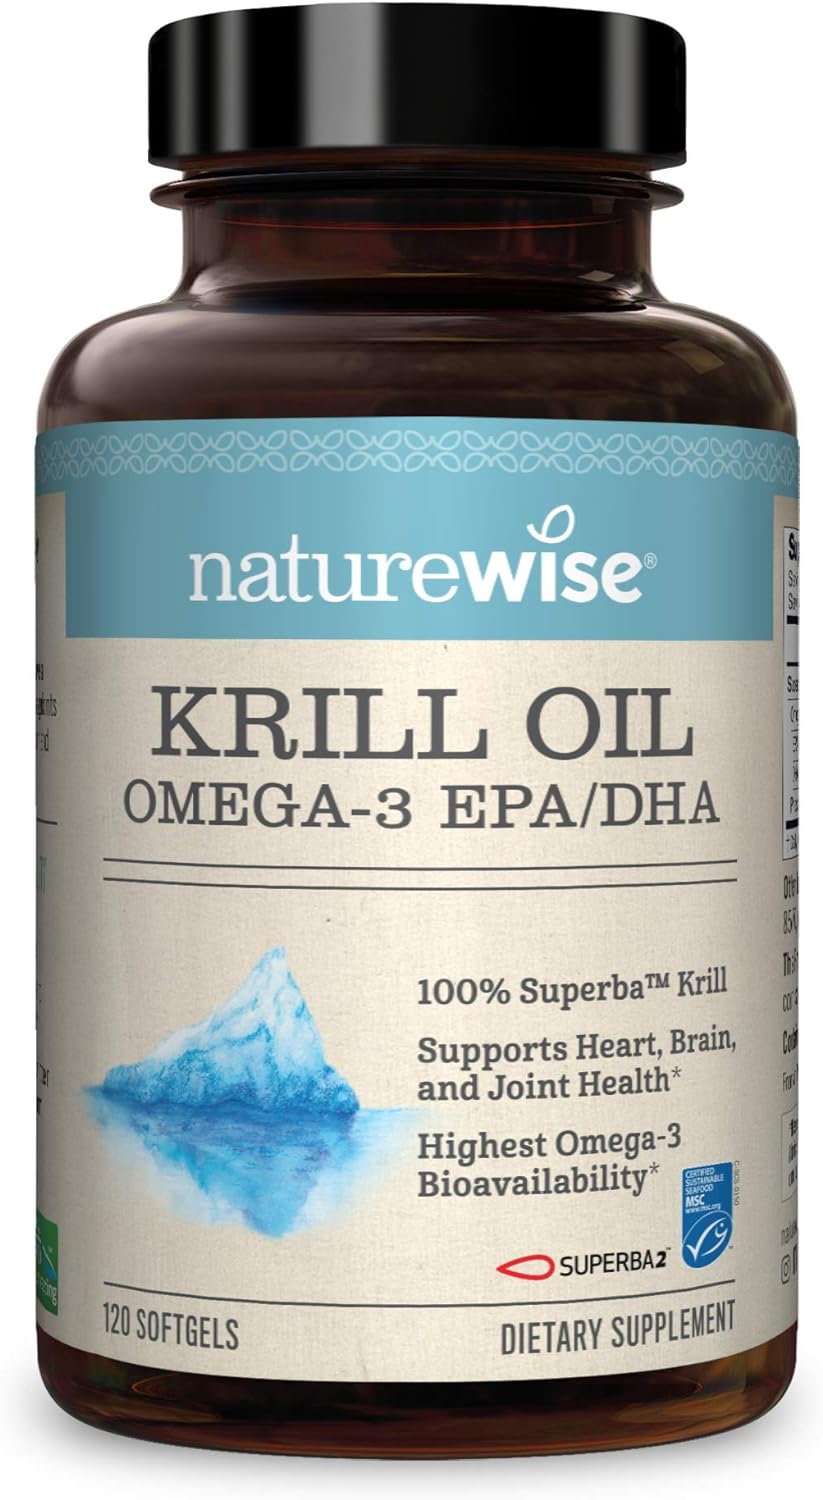 NatureWise Wild-Caught Krill Oil (2 Month Supply) Heart Health and Mob